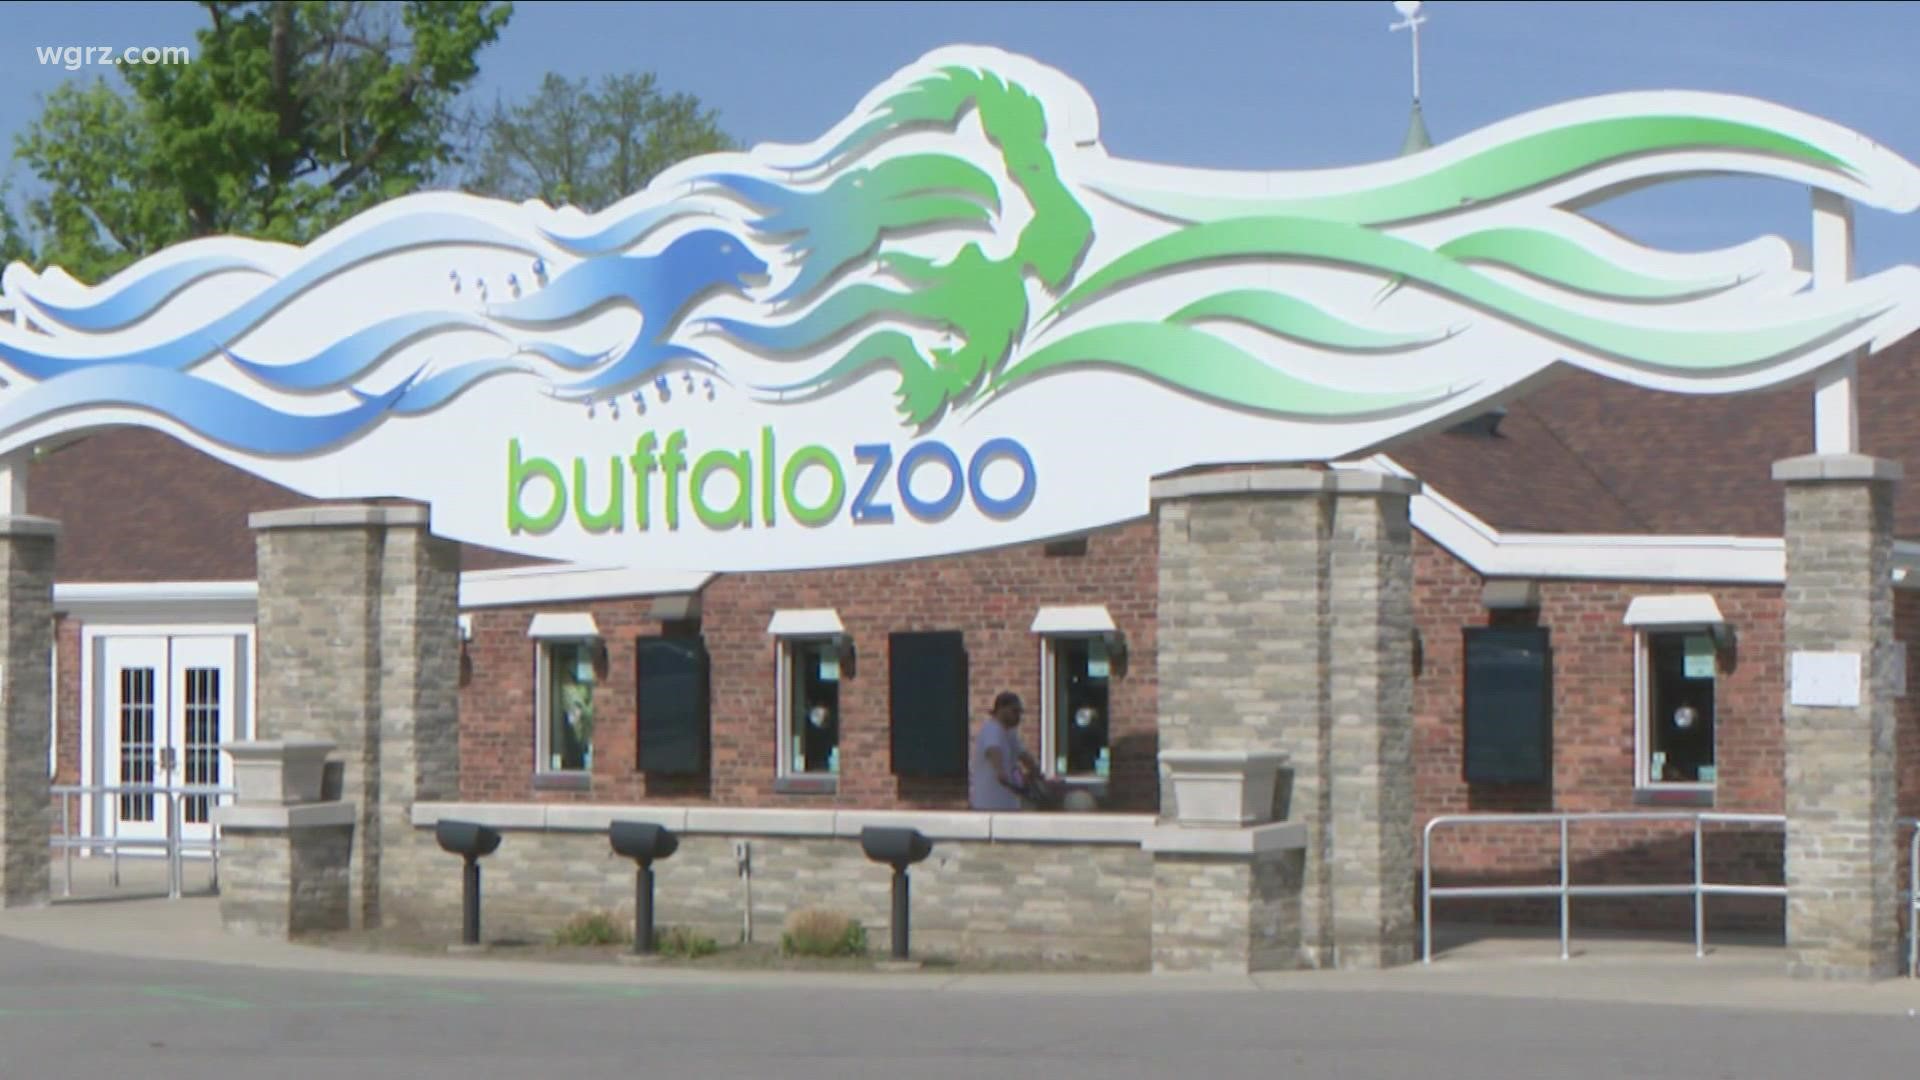 3rd Grade class takes a trip to The Buffalo Zoo, for the first time